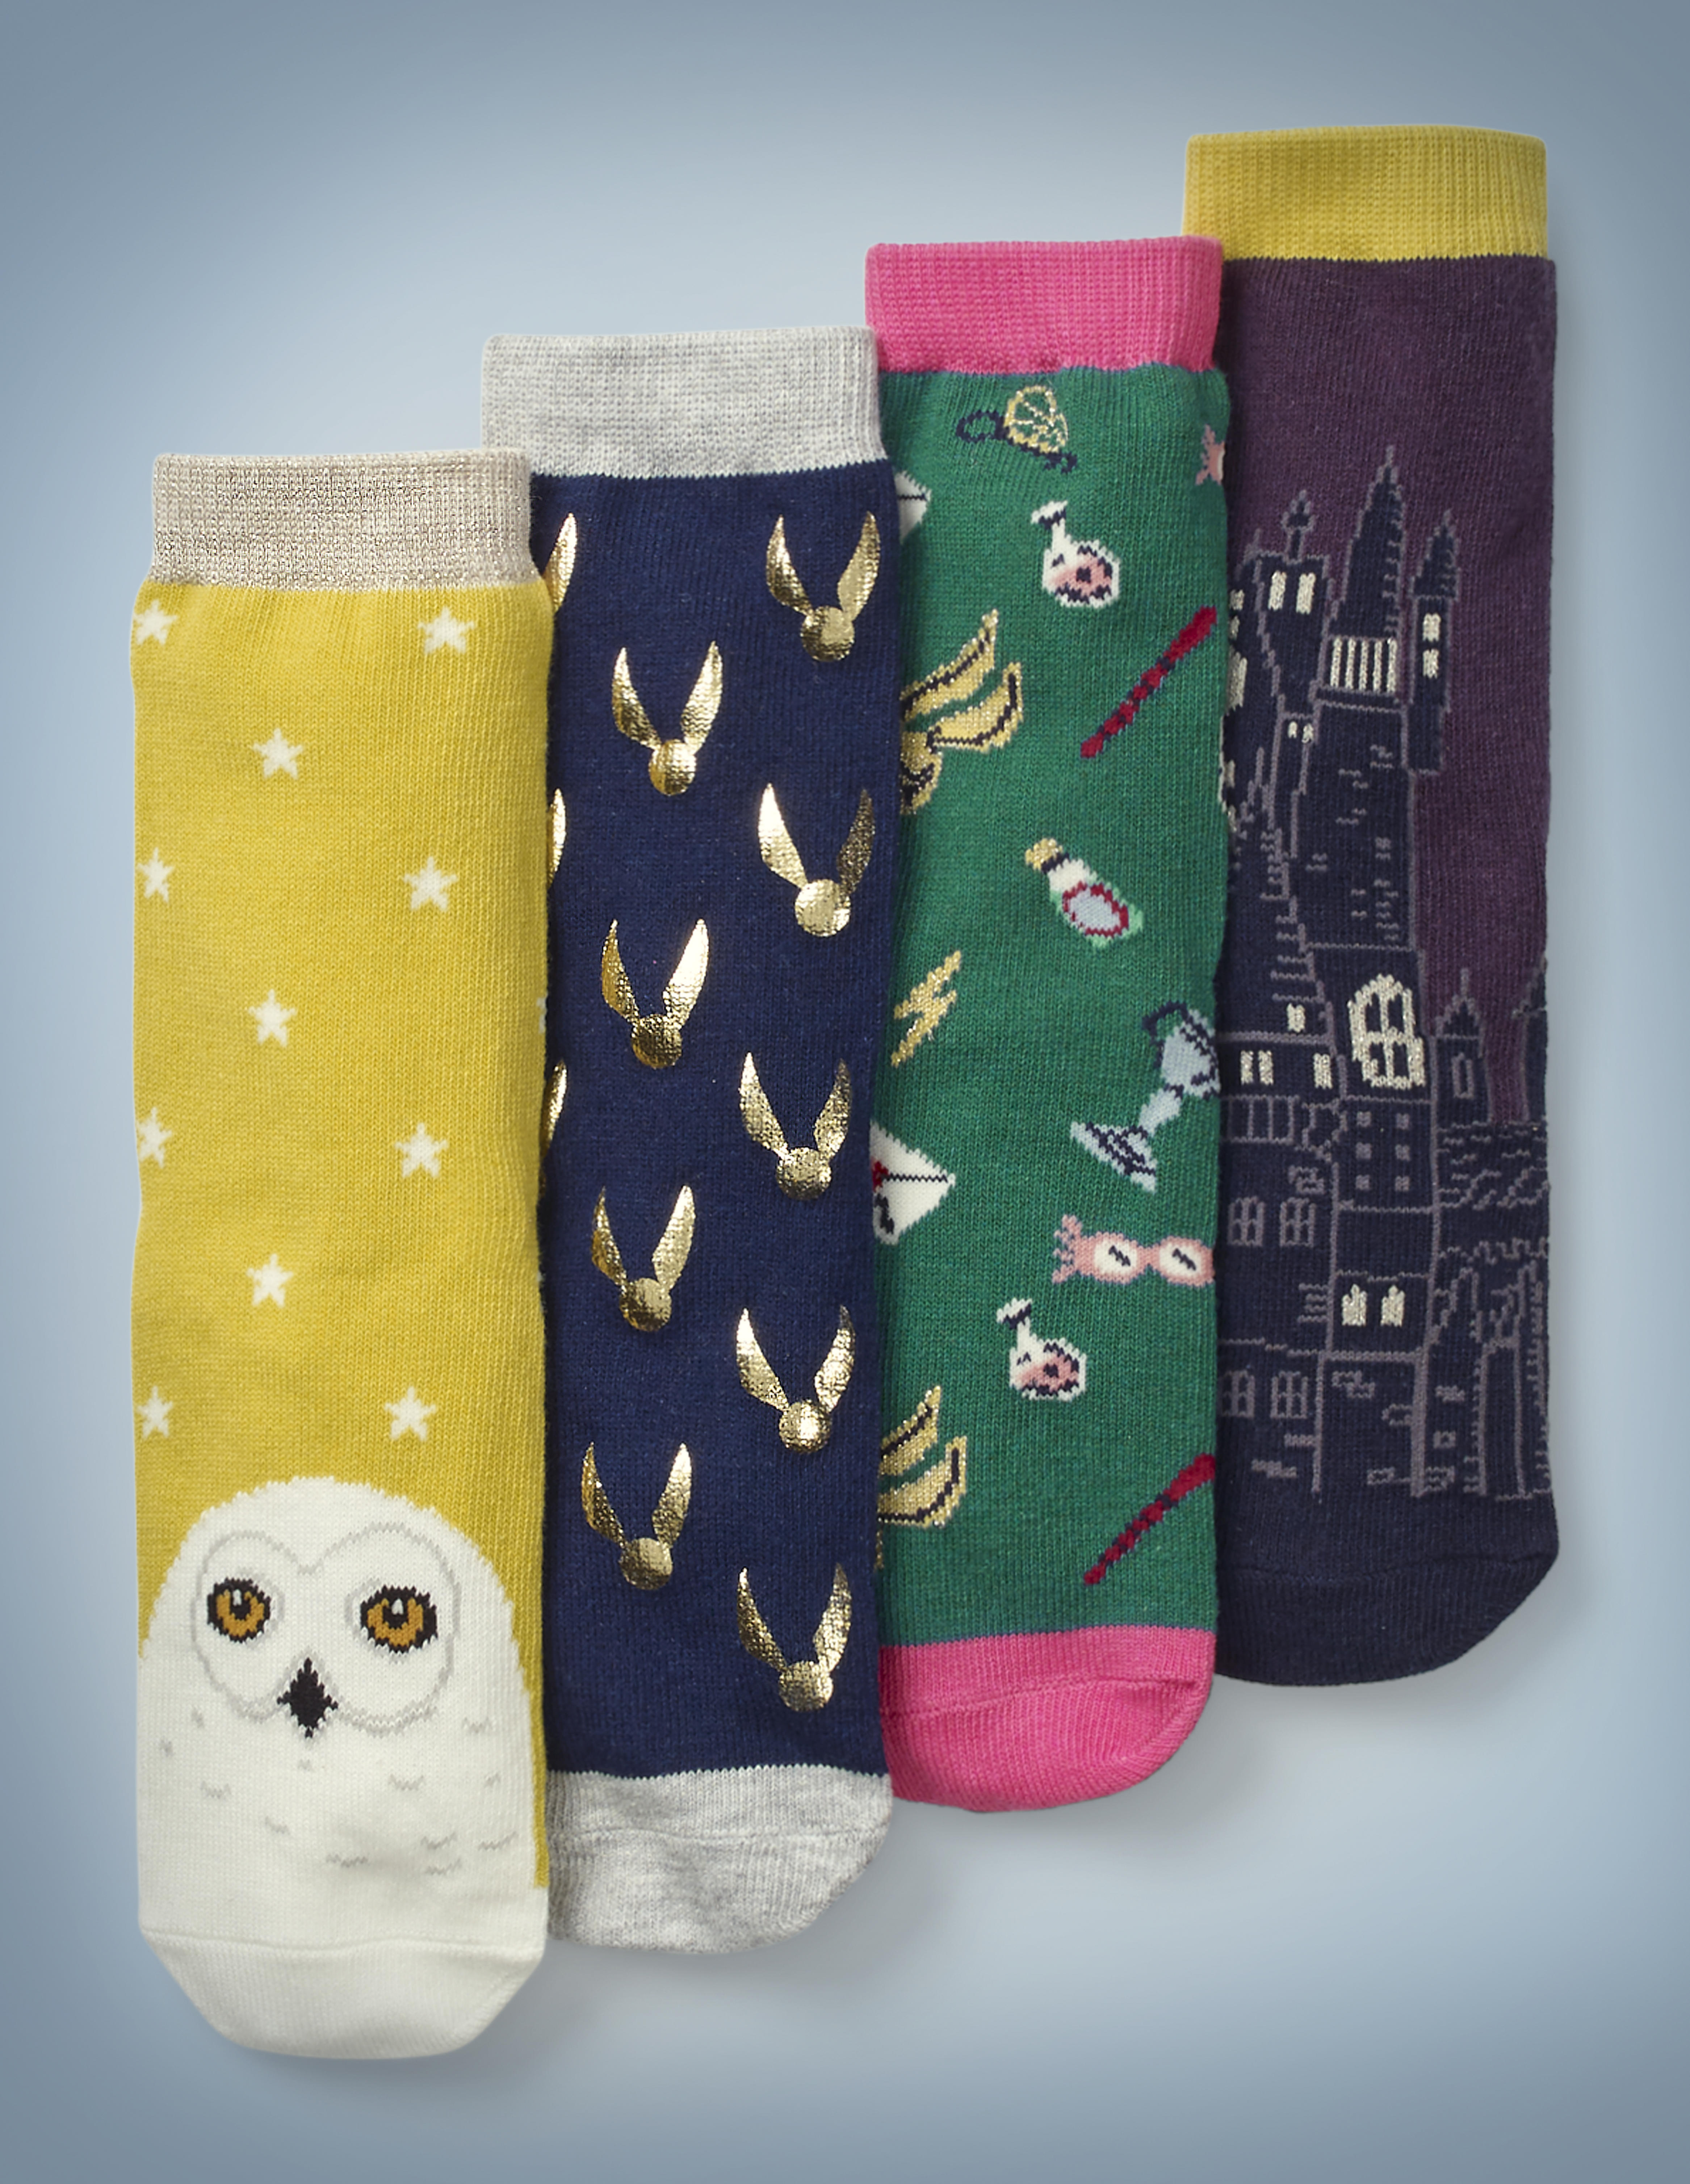 The Mini Boden Pack of Harry Potter Socks features four different designs. Hedwig’s face adorns the toe of a gold pair of socks with a white star pattern. Shiny Golden Snitches cover a navy blue pair. Iconic “Harry Potter” items, such as Luna Lovegood’s Spectrespecs and Hogwarts acceptance letters, cover a green and pink pair. An image of Hogwarts adorns a plum and gold pair. The pack retails at £18.